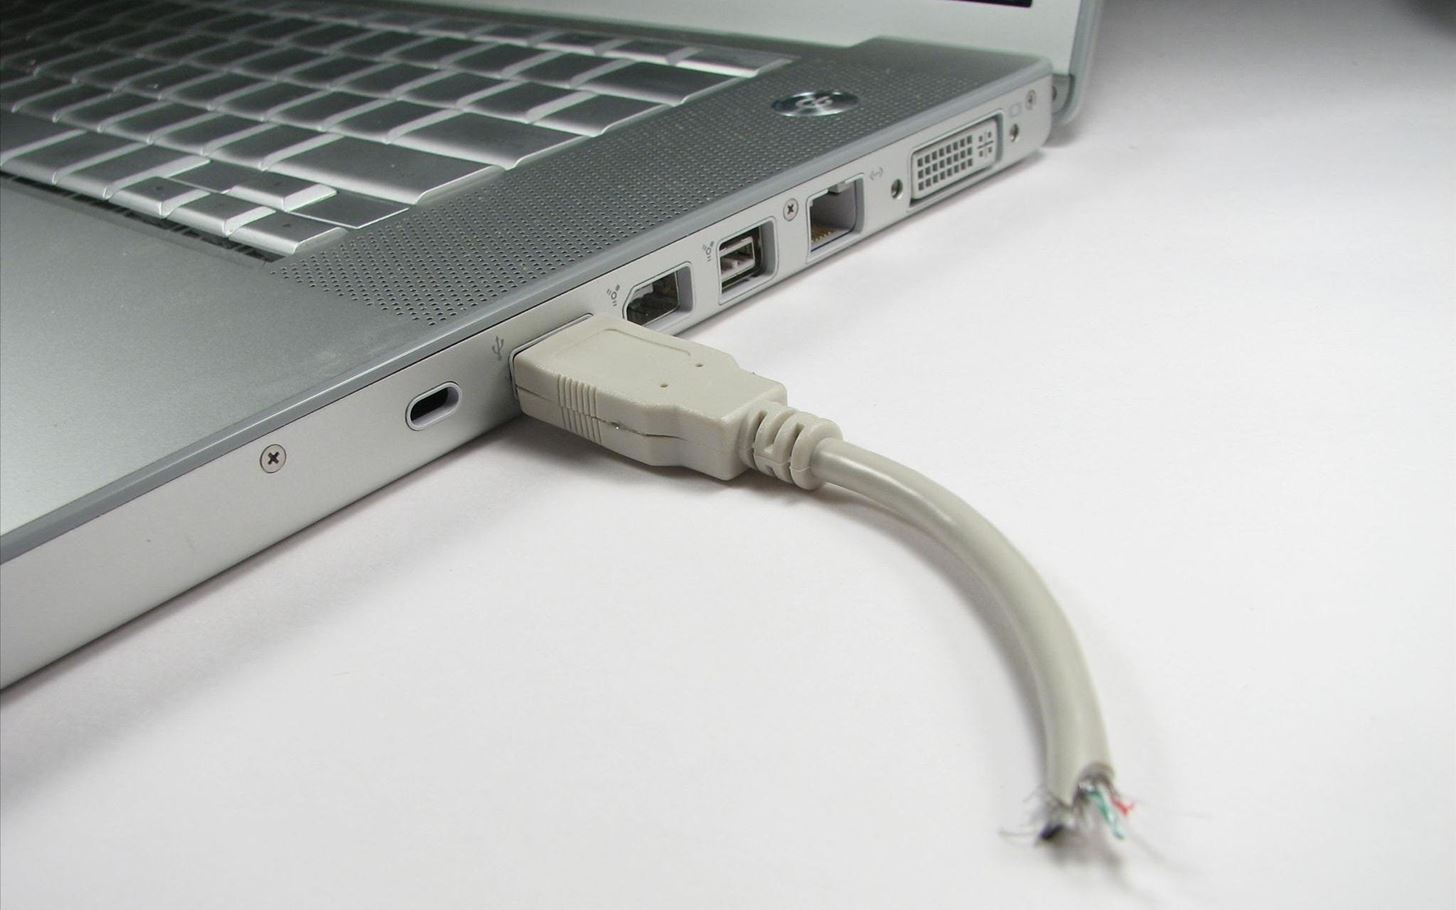 Deter Data Thieves from Stealing Your Flash Drive by Disguising It as a Broken USB Cable